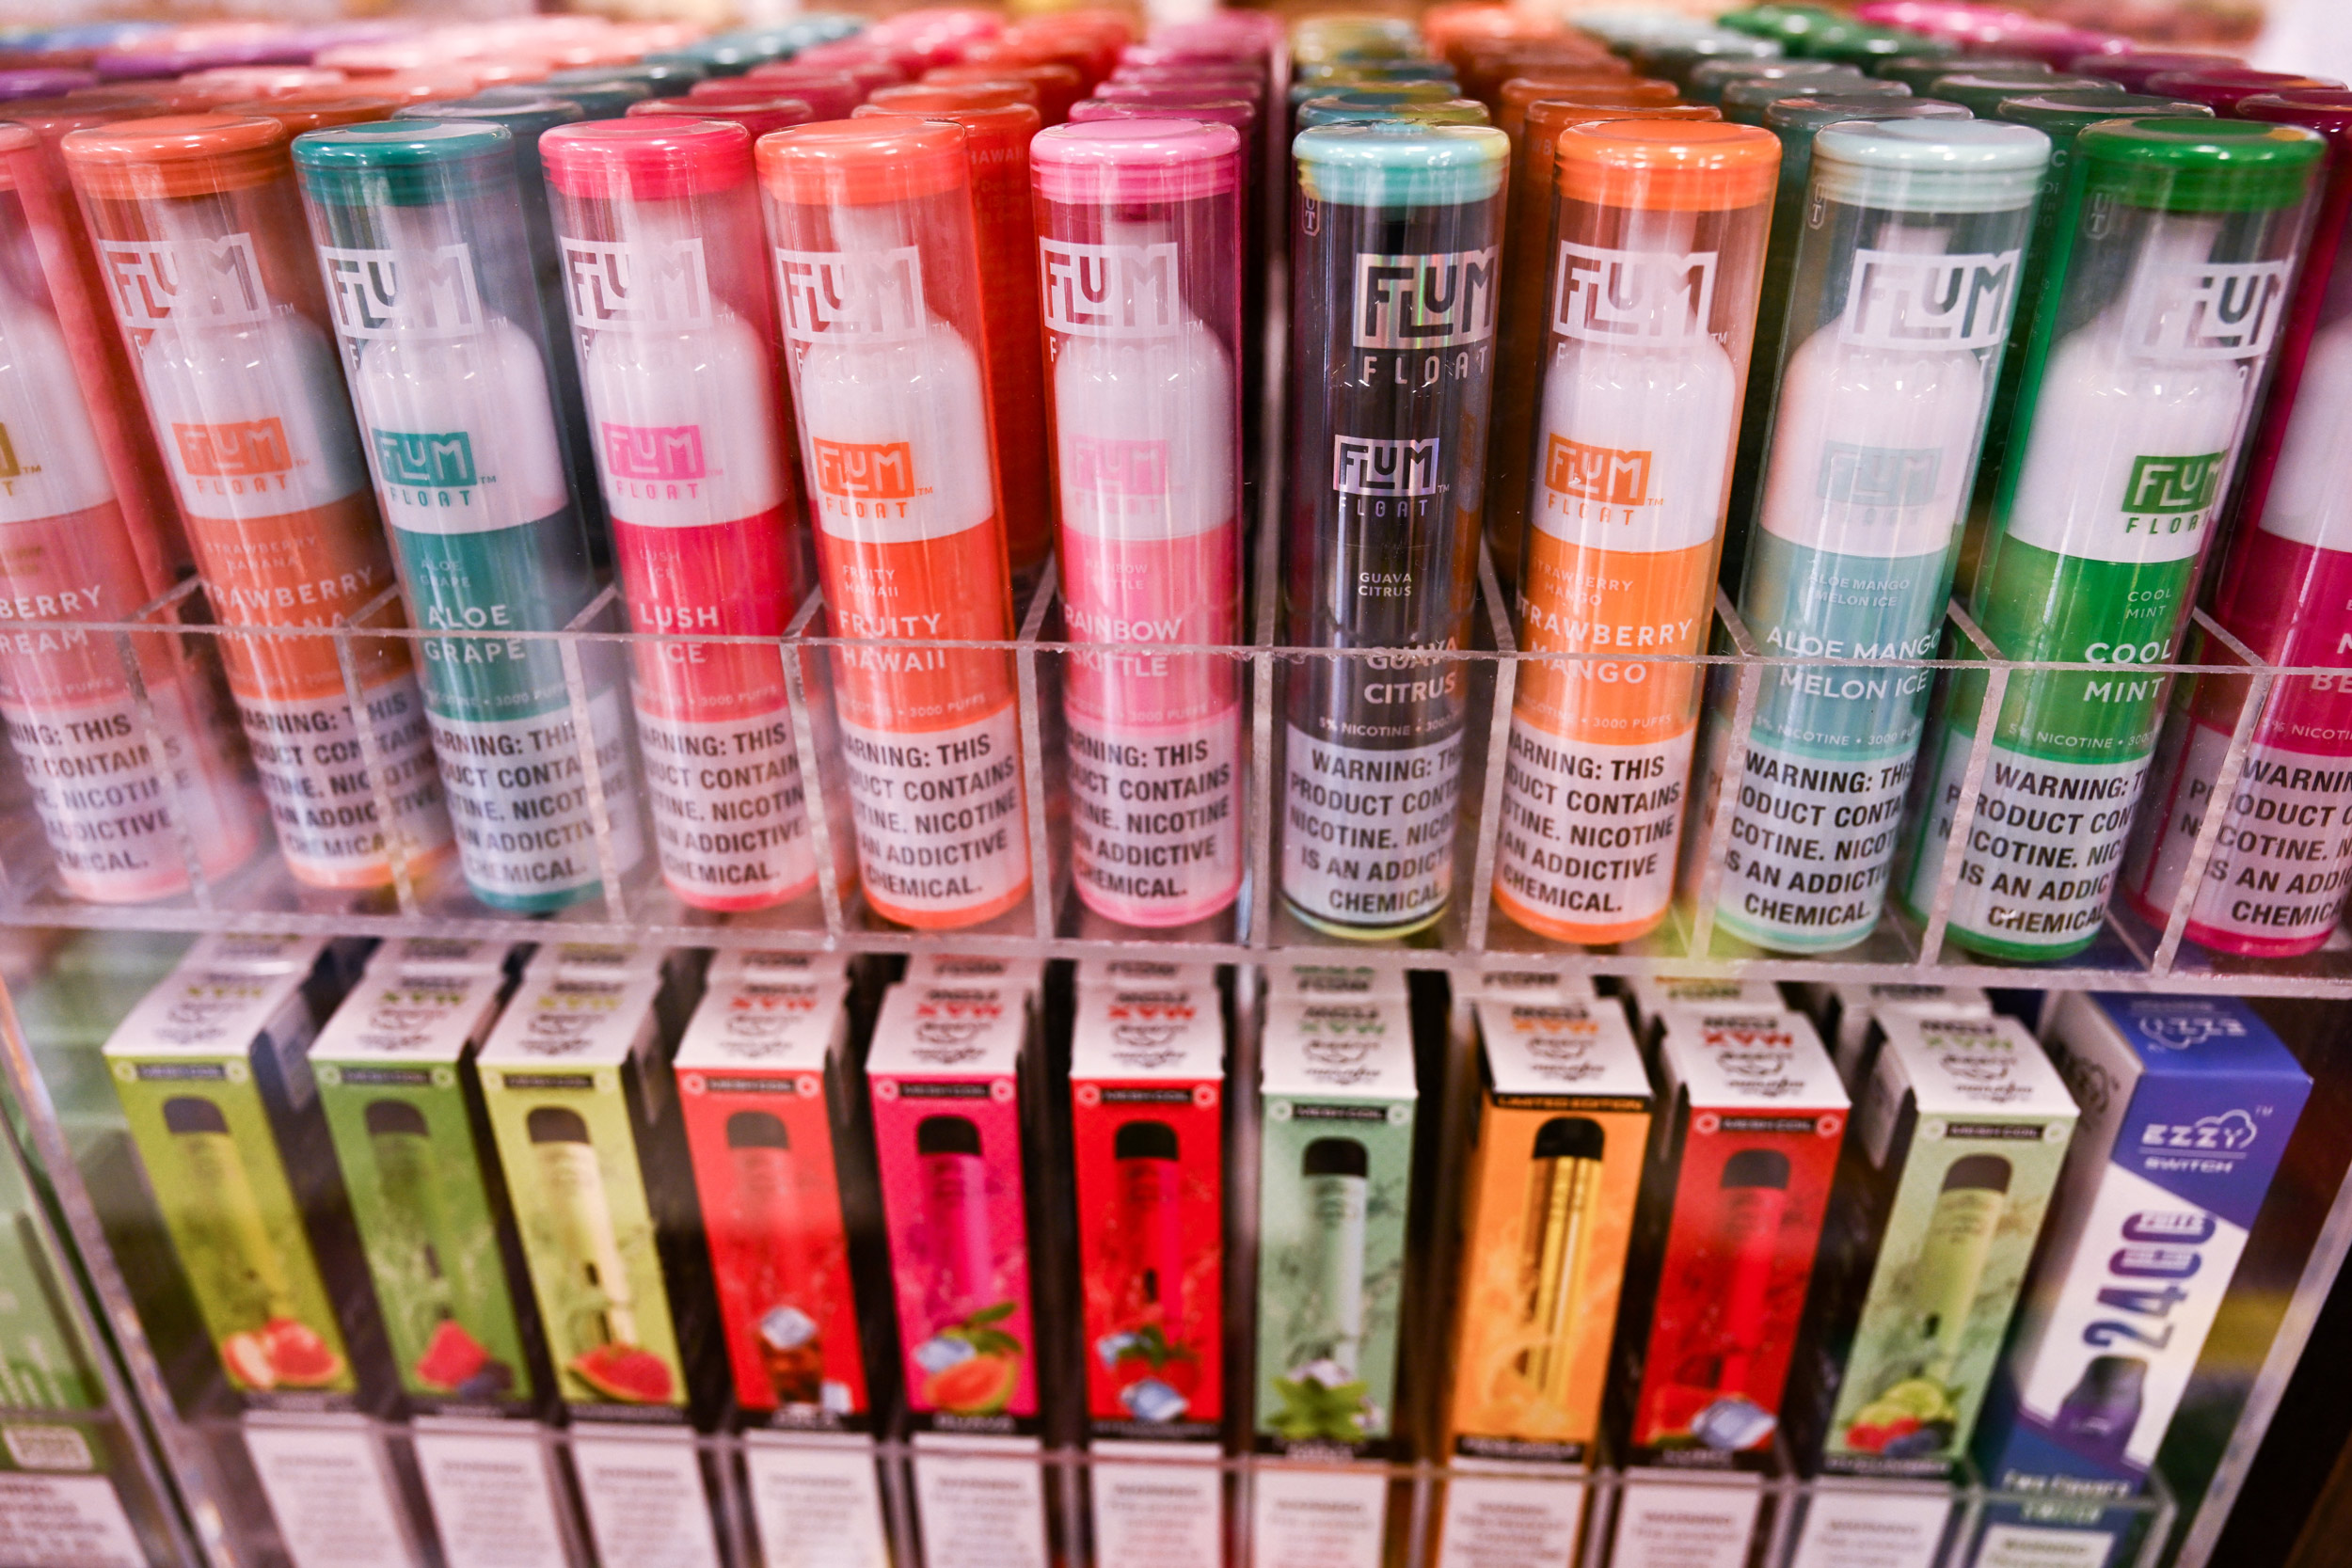 A photo of colorful disposable vapes shown inside a convenience store.